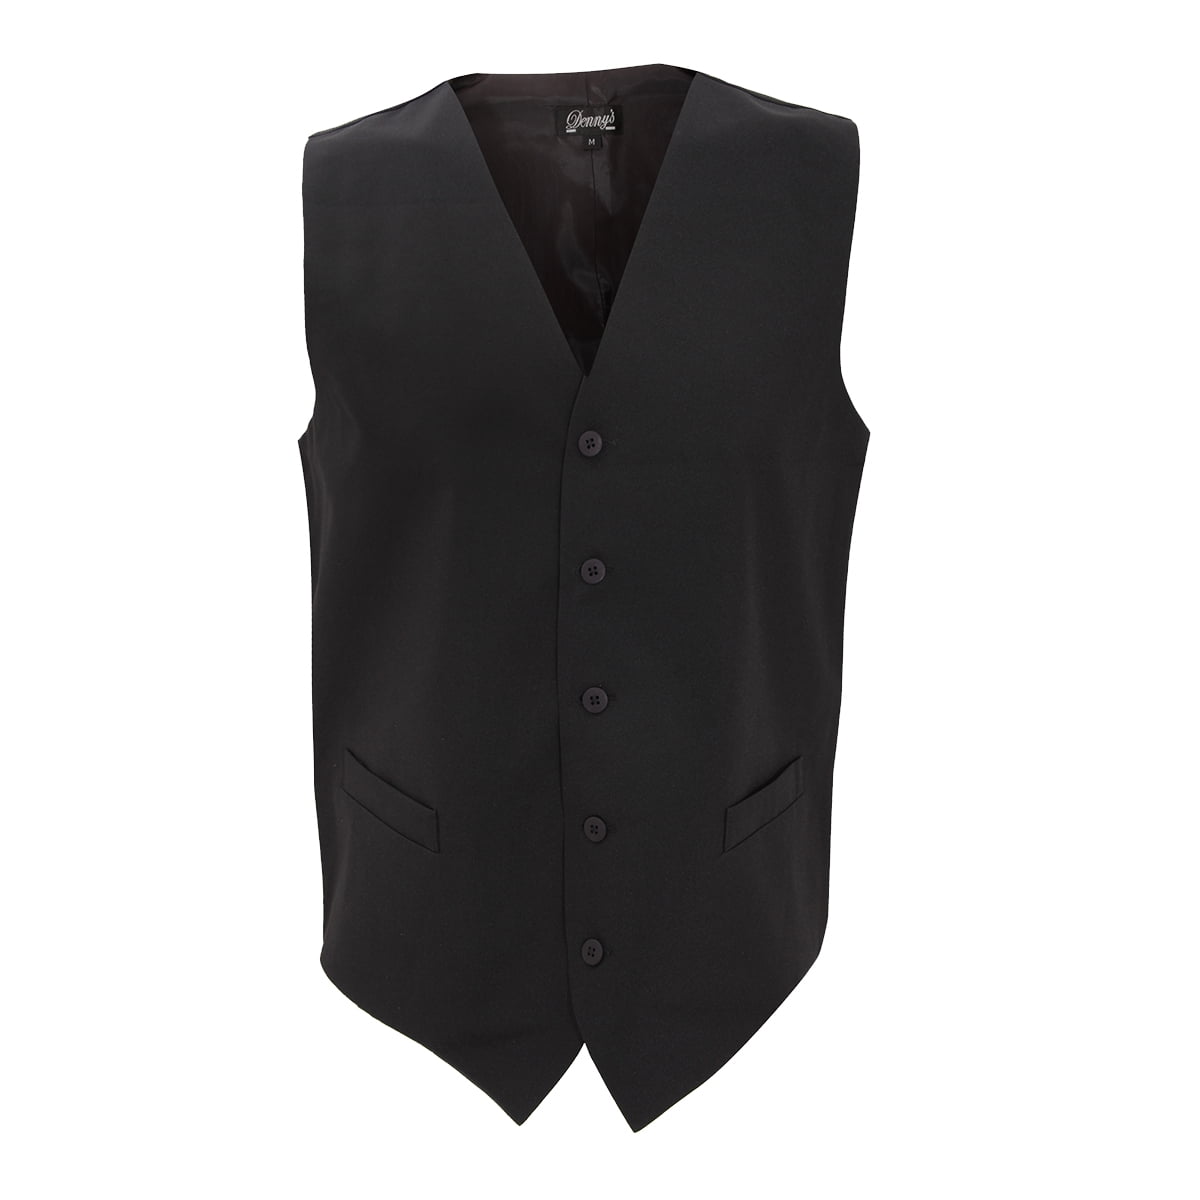 Dennys Unisex Catering Waistcoat High Quality All Sizes XS-2XL 